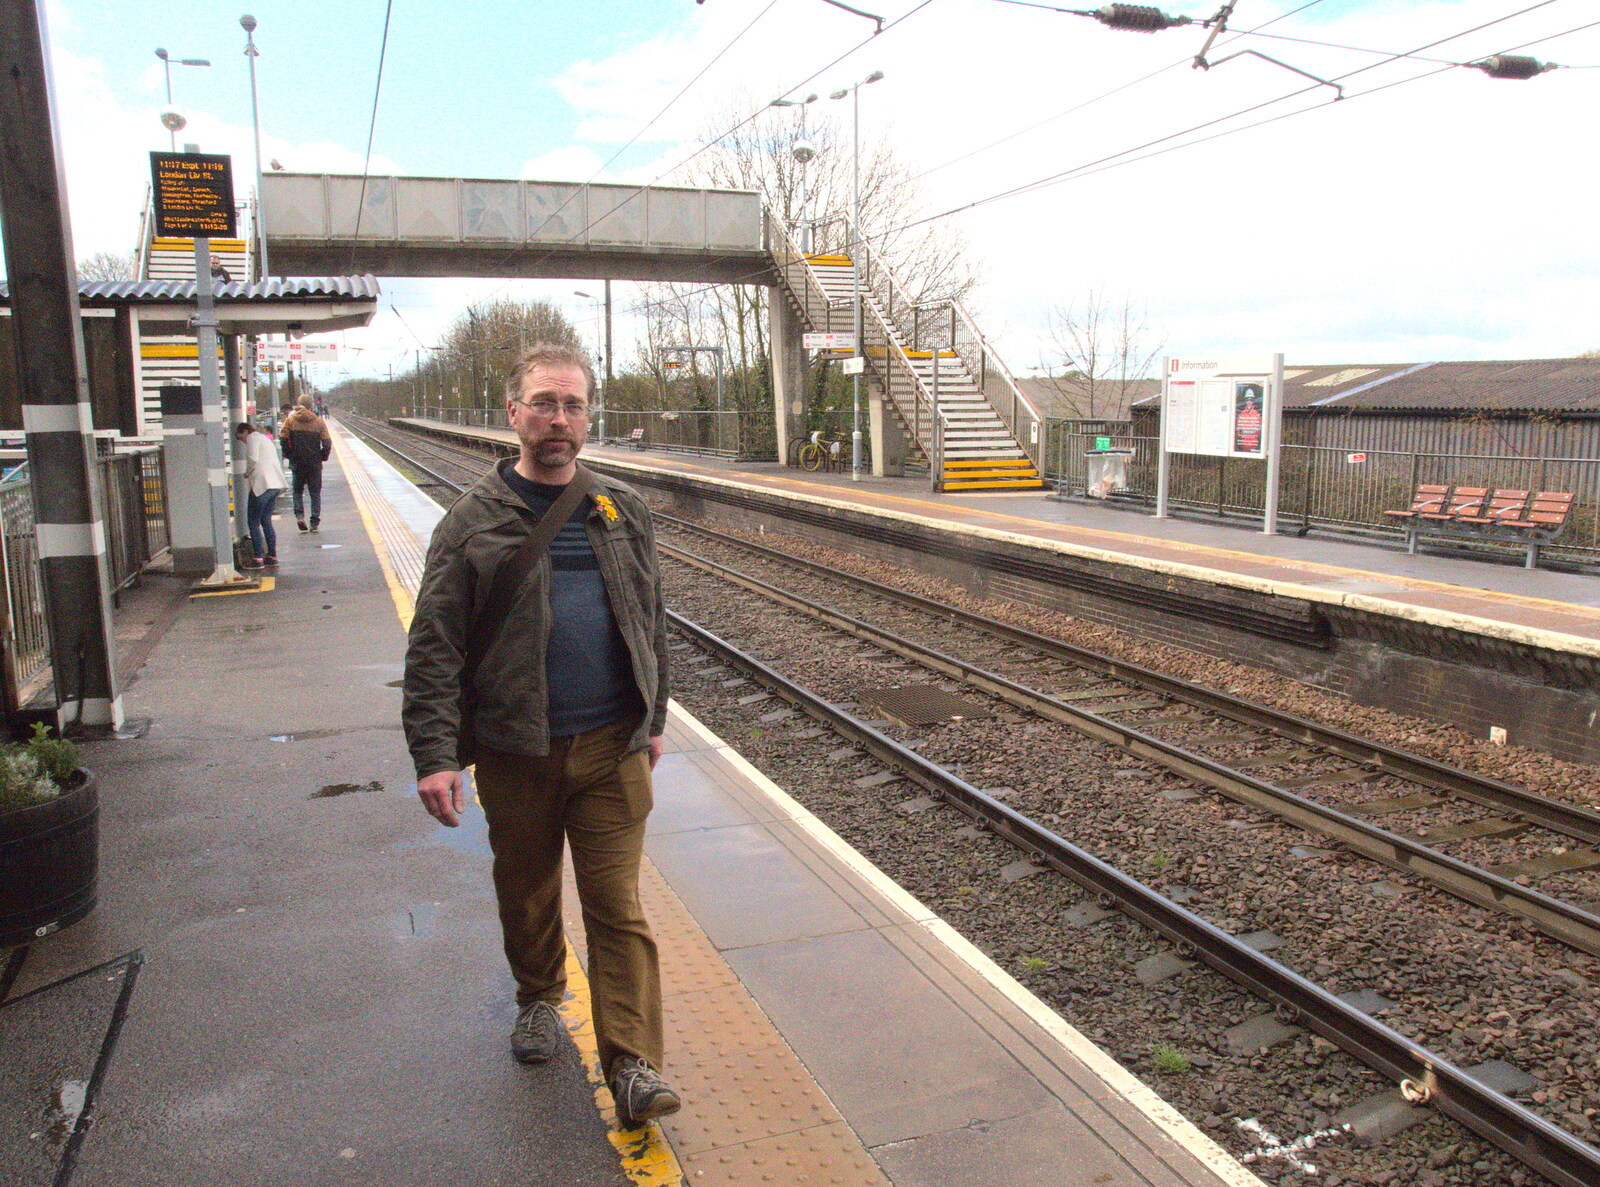 Marc roams Platform 1 at Diss from The East Anglian Beer Festival, Bury St Edmunds, Suffolk - 23rd April 2016